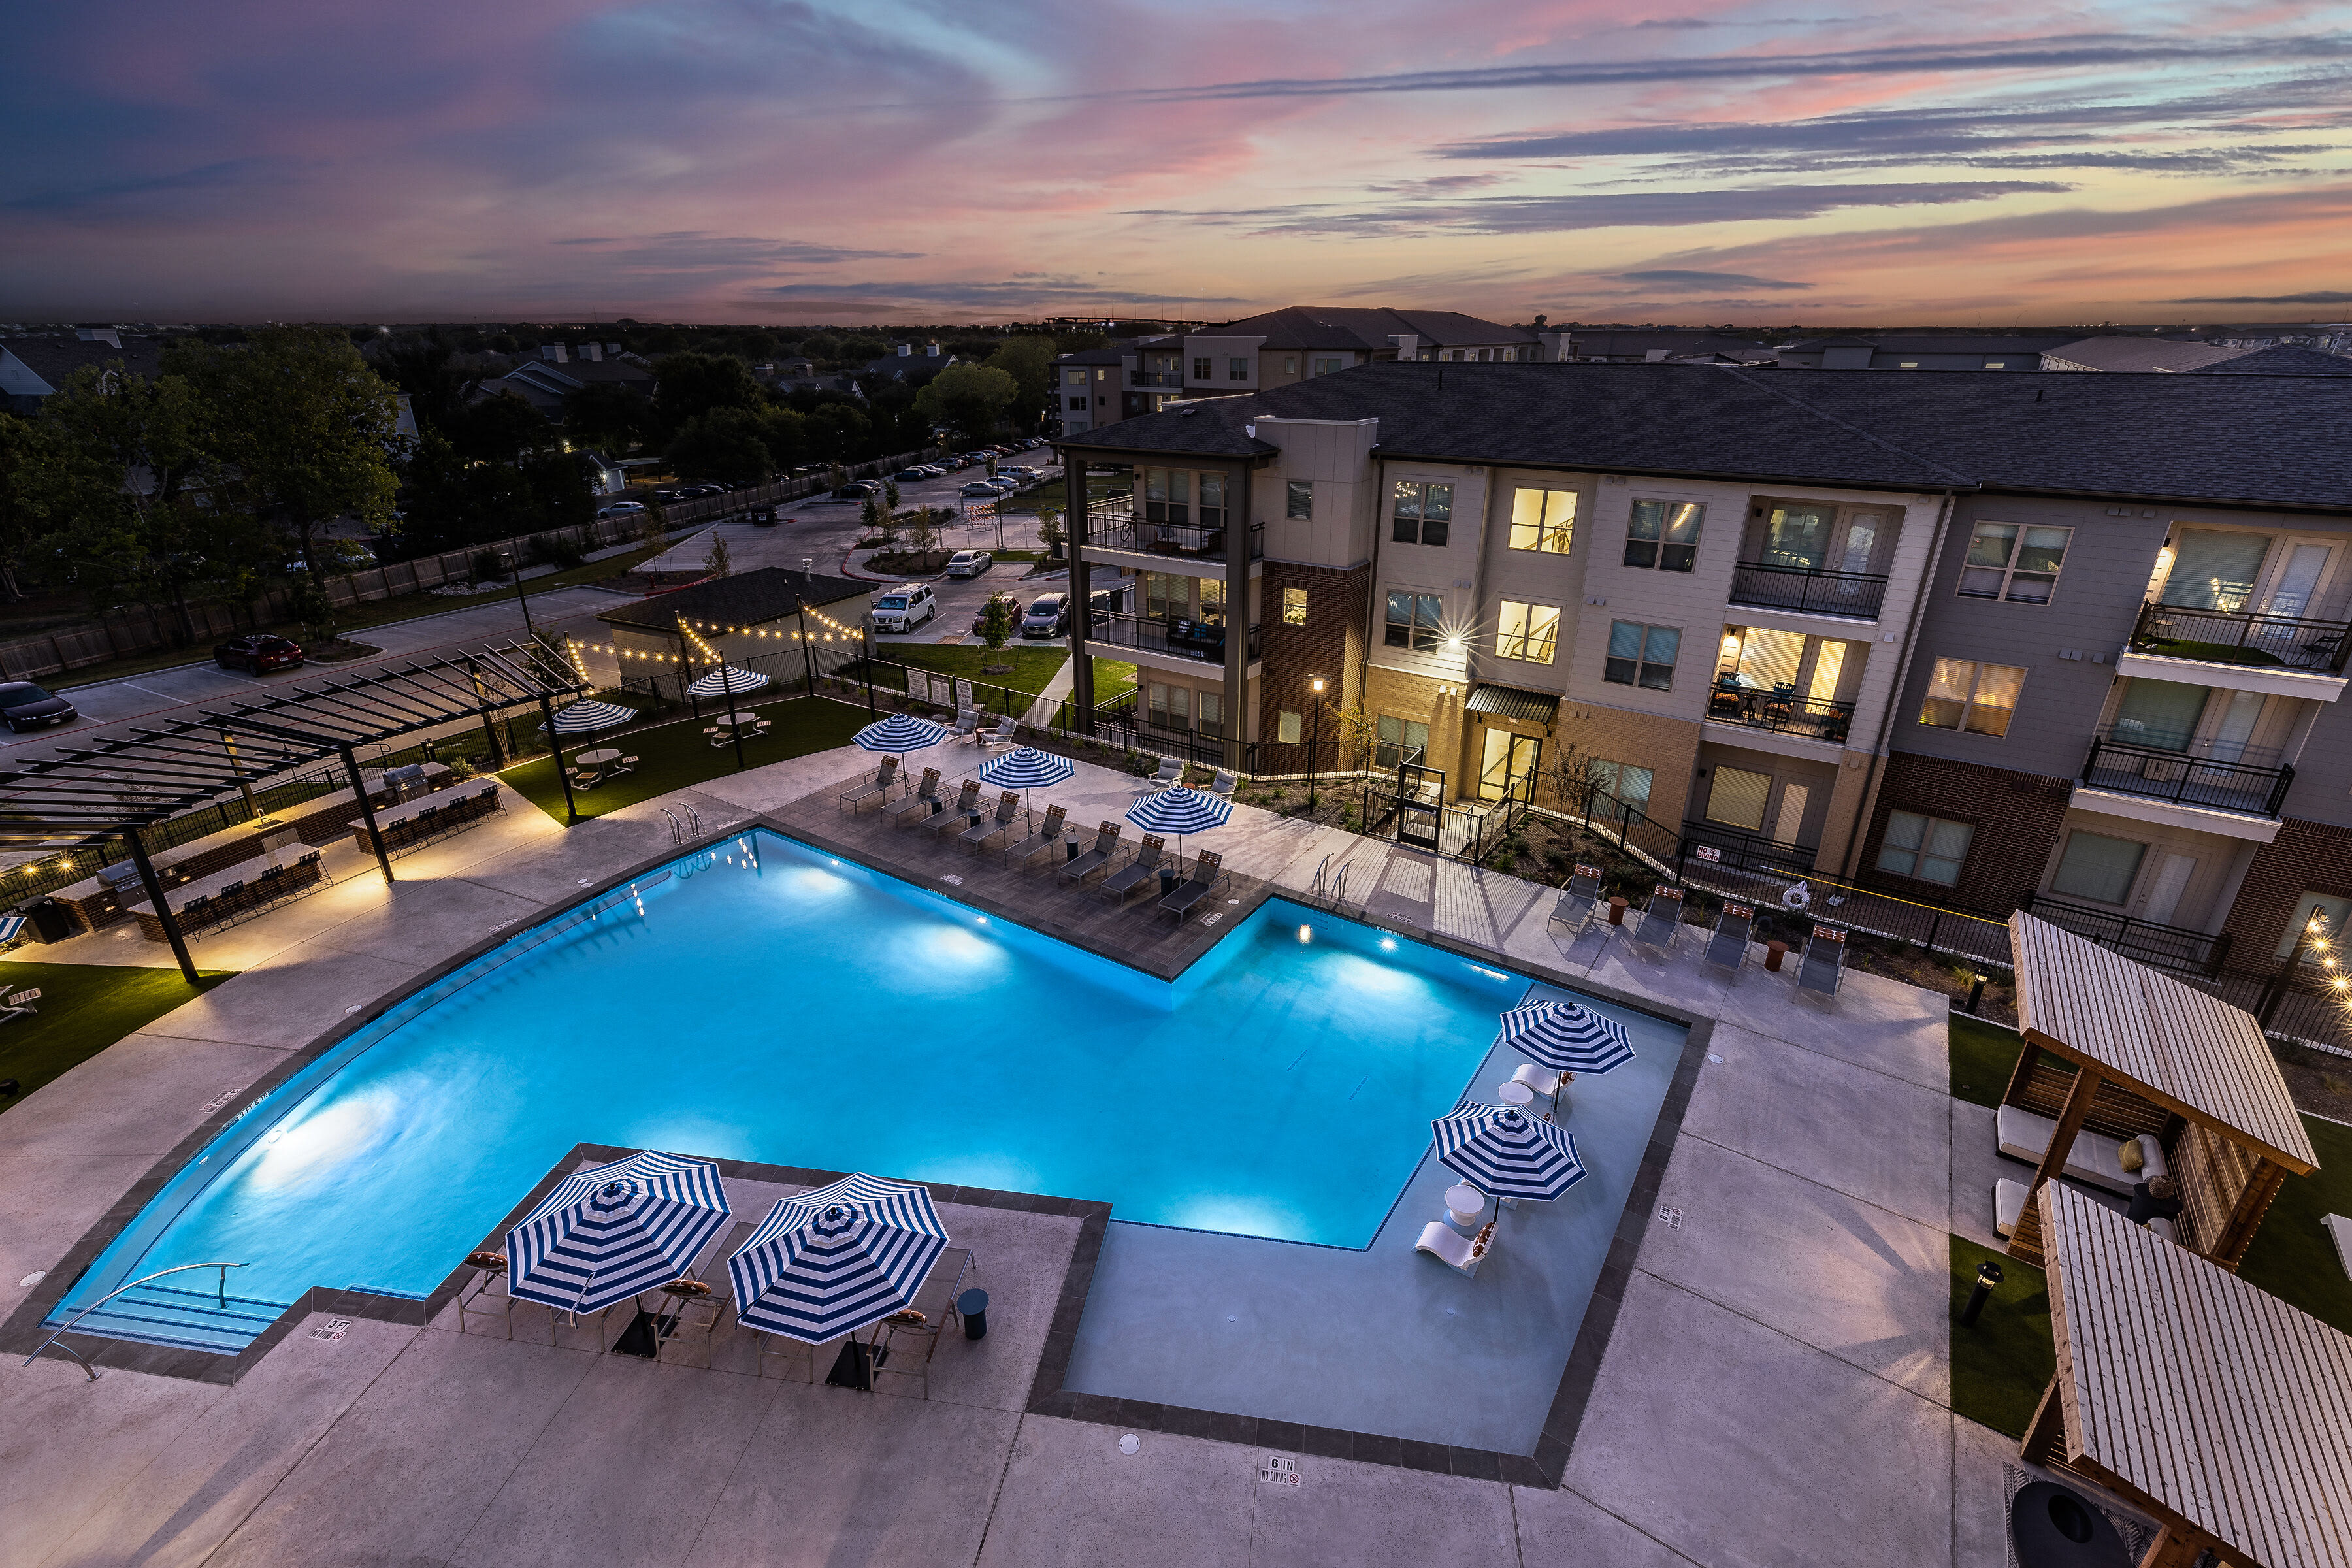 Arial view of the pool at night at The Warner in Round Rock, Texas